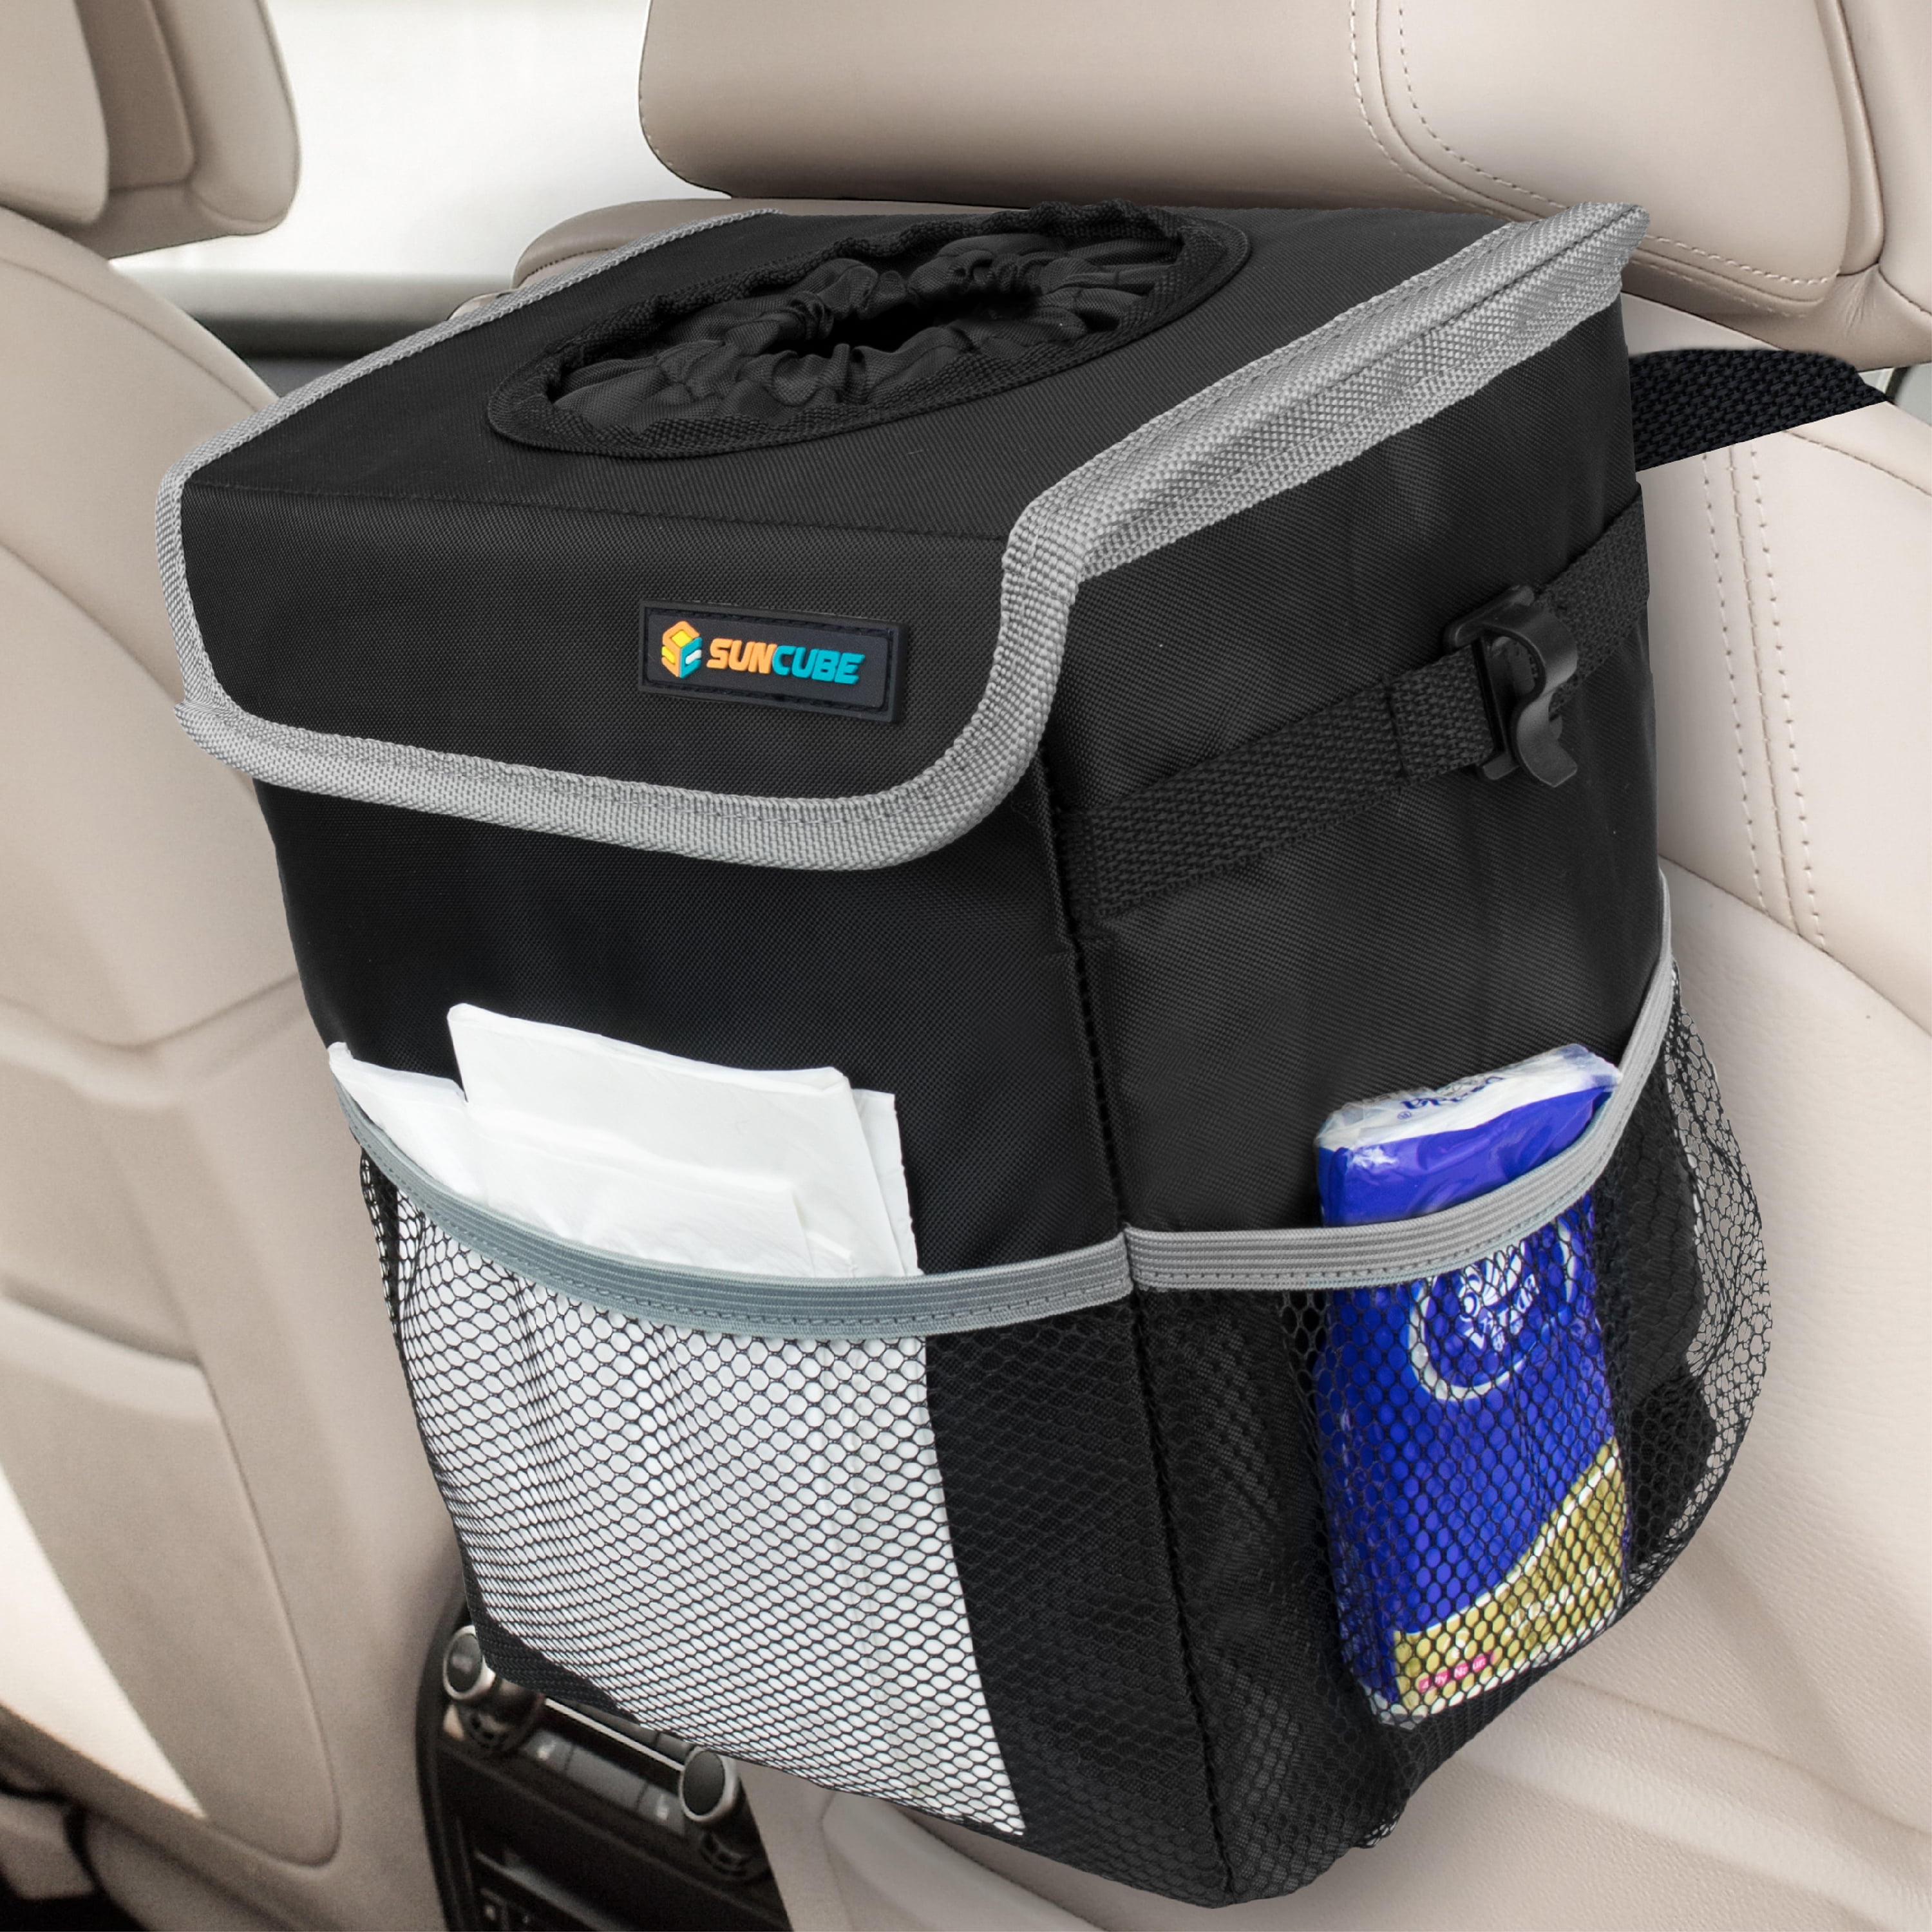  Sunferno Car Trash Can - Garbage Bag With Lid - Compact,  Waterproof Leakproof Bag for Car Storage and Organization - Hanging Trash  Bin for Back Seat - Auto Accessories Car Gadgets